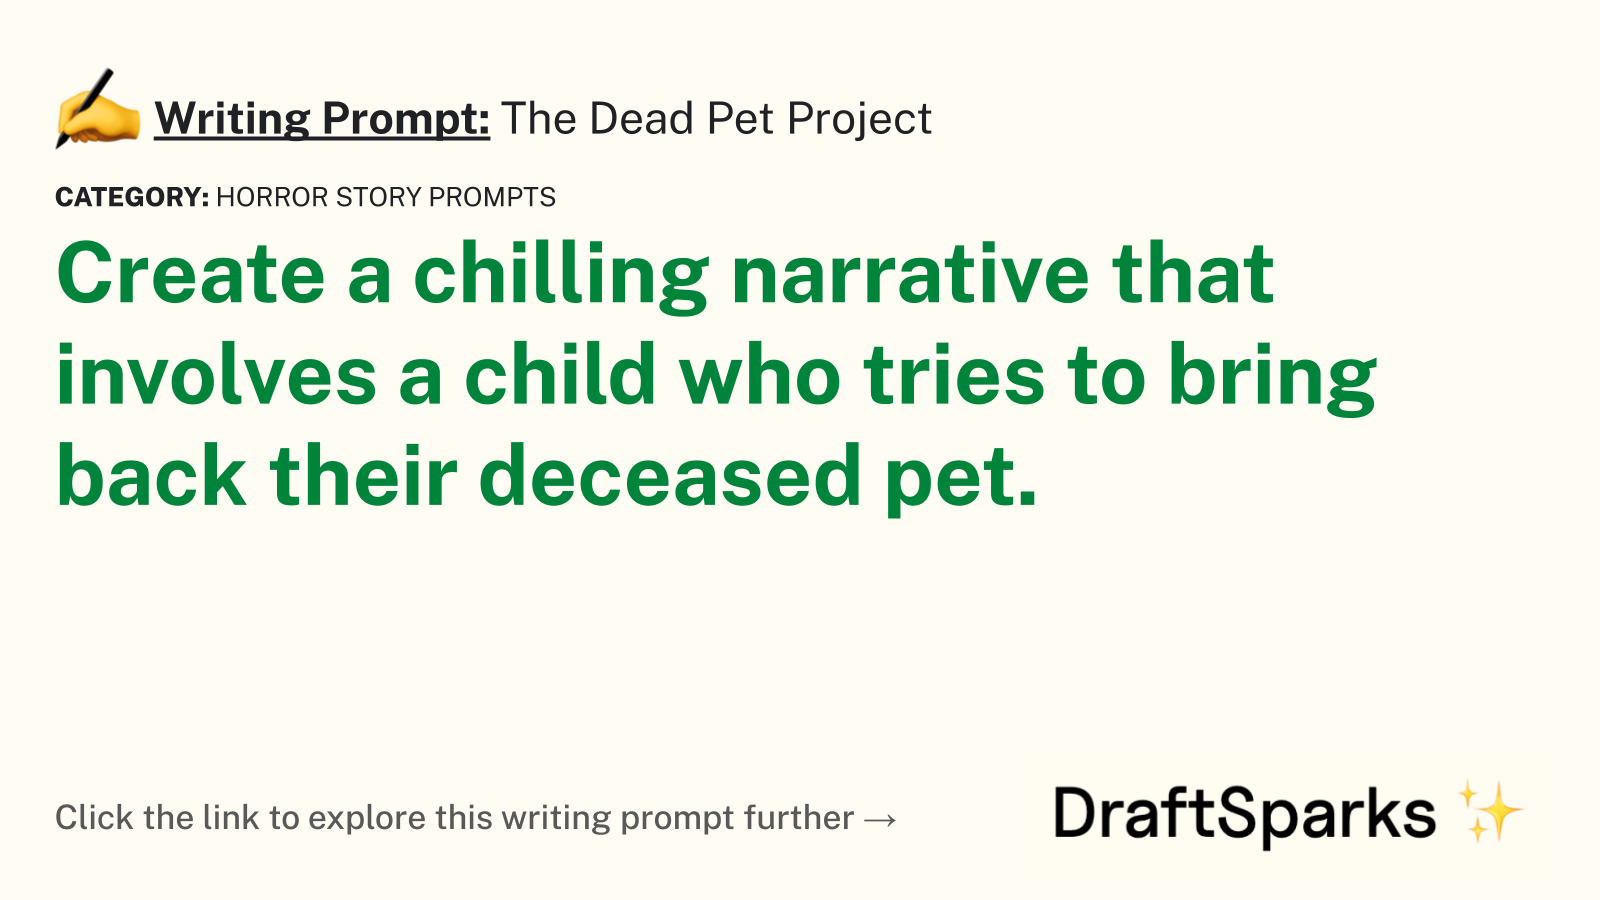 The Dead Pet Project